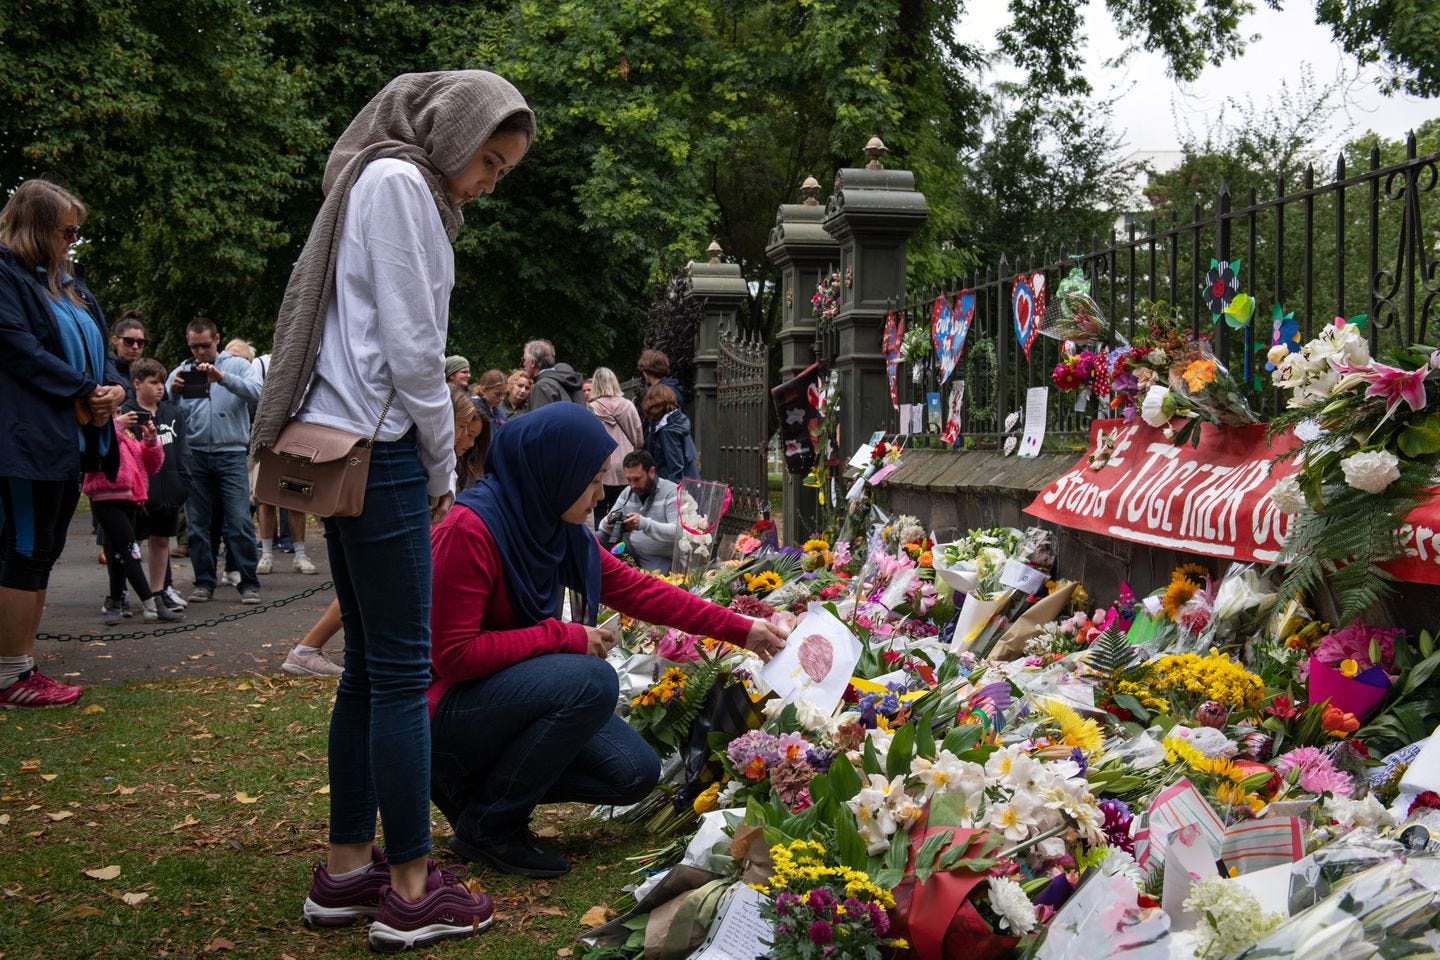 A makeshift memorial to the victims of the mosque massacre in Christchurch, New Zealand, in 2019. A planned Hollywood film about the mass shootings has drawn a sharp backlash in New Zealand, with Muslims denouncing the director's decision to focus not on the community's pain and resilience, but instead on the response by Prime Minister Jacinda Ardern.